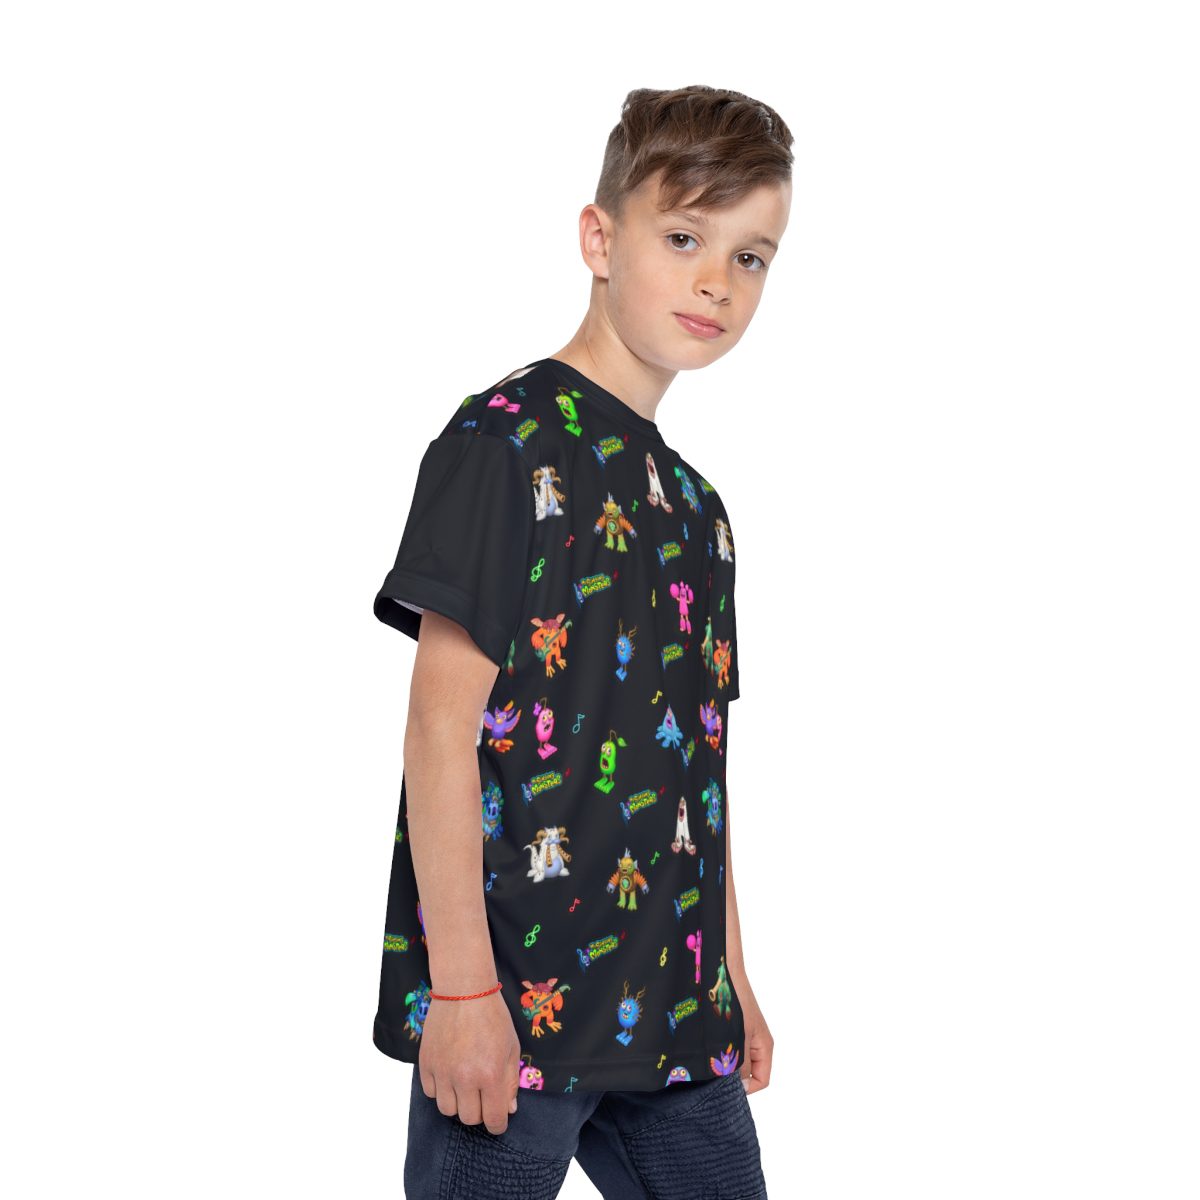 My Singing Monsters Kids Sports Jersey (All Over Print) Cool Kiddo 26